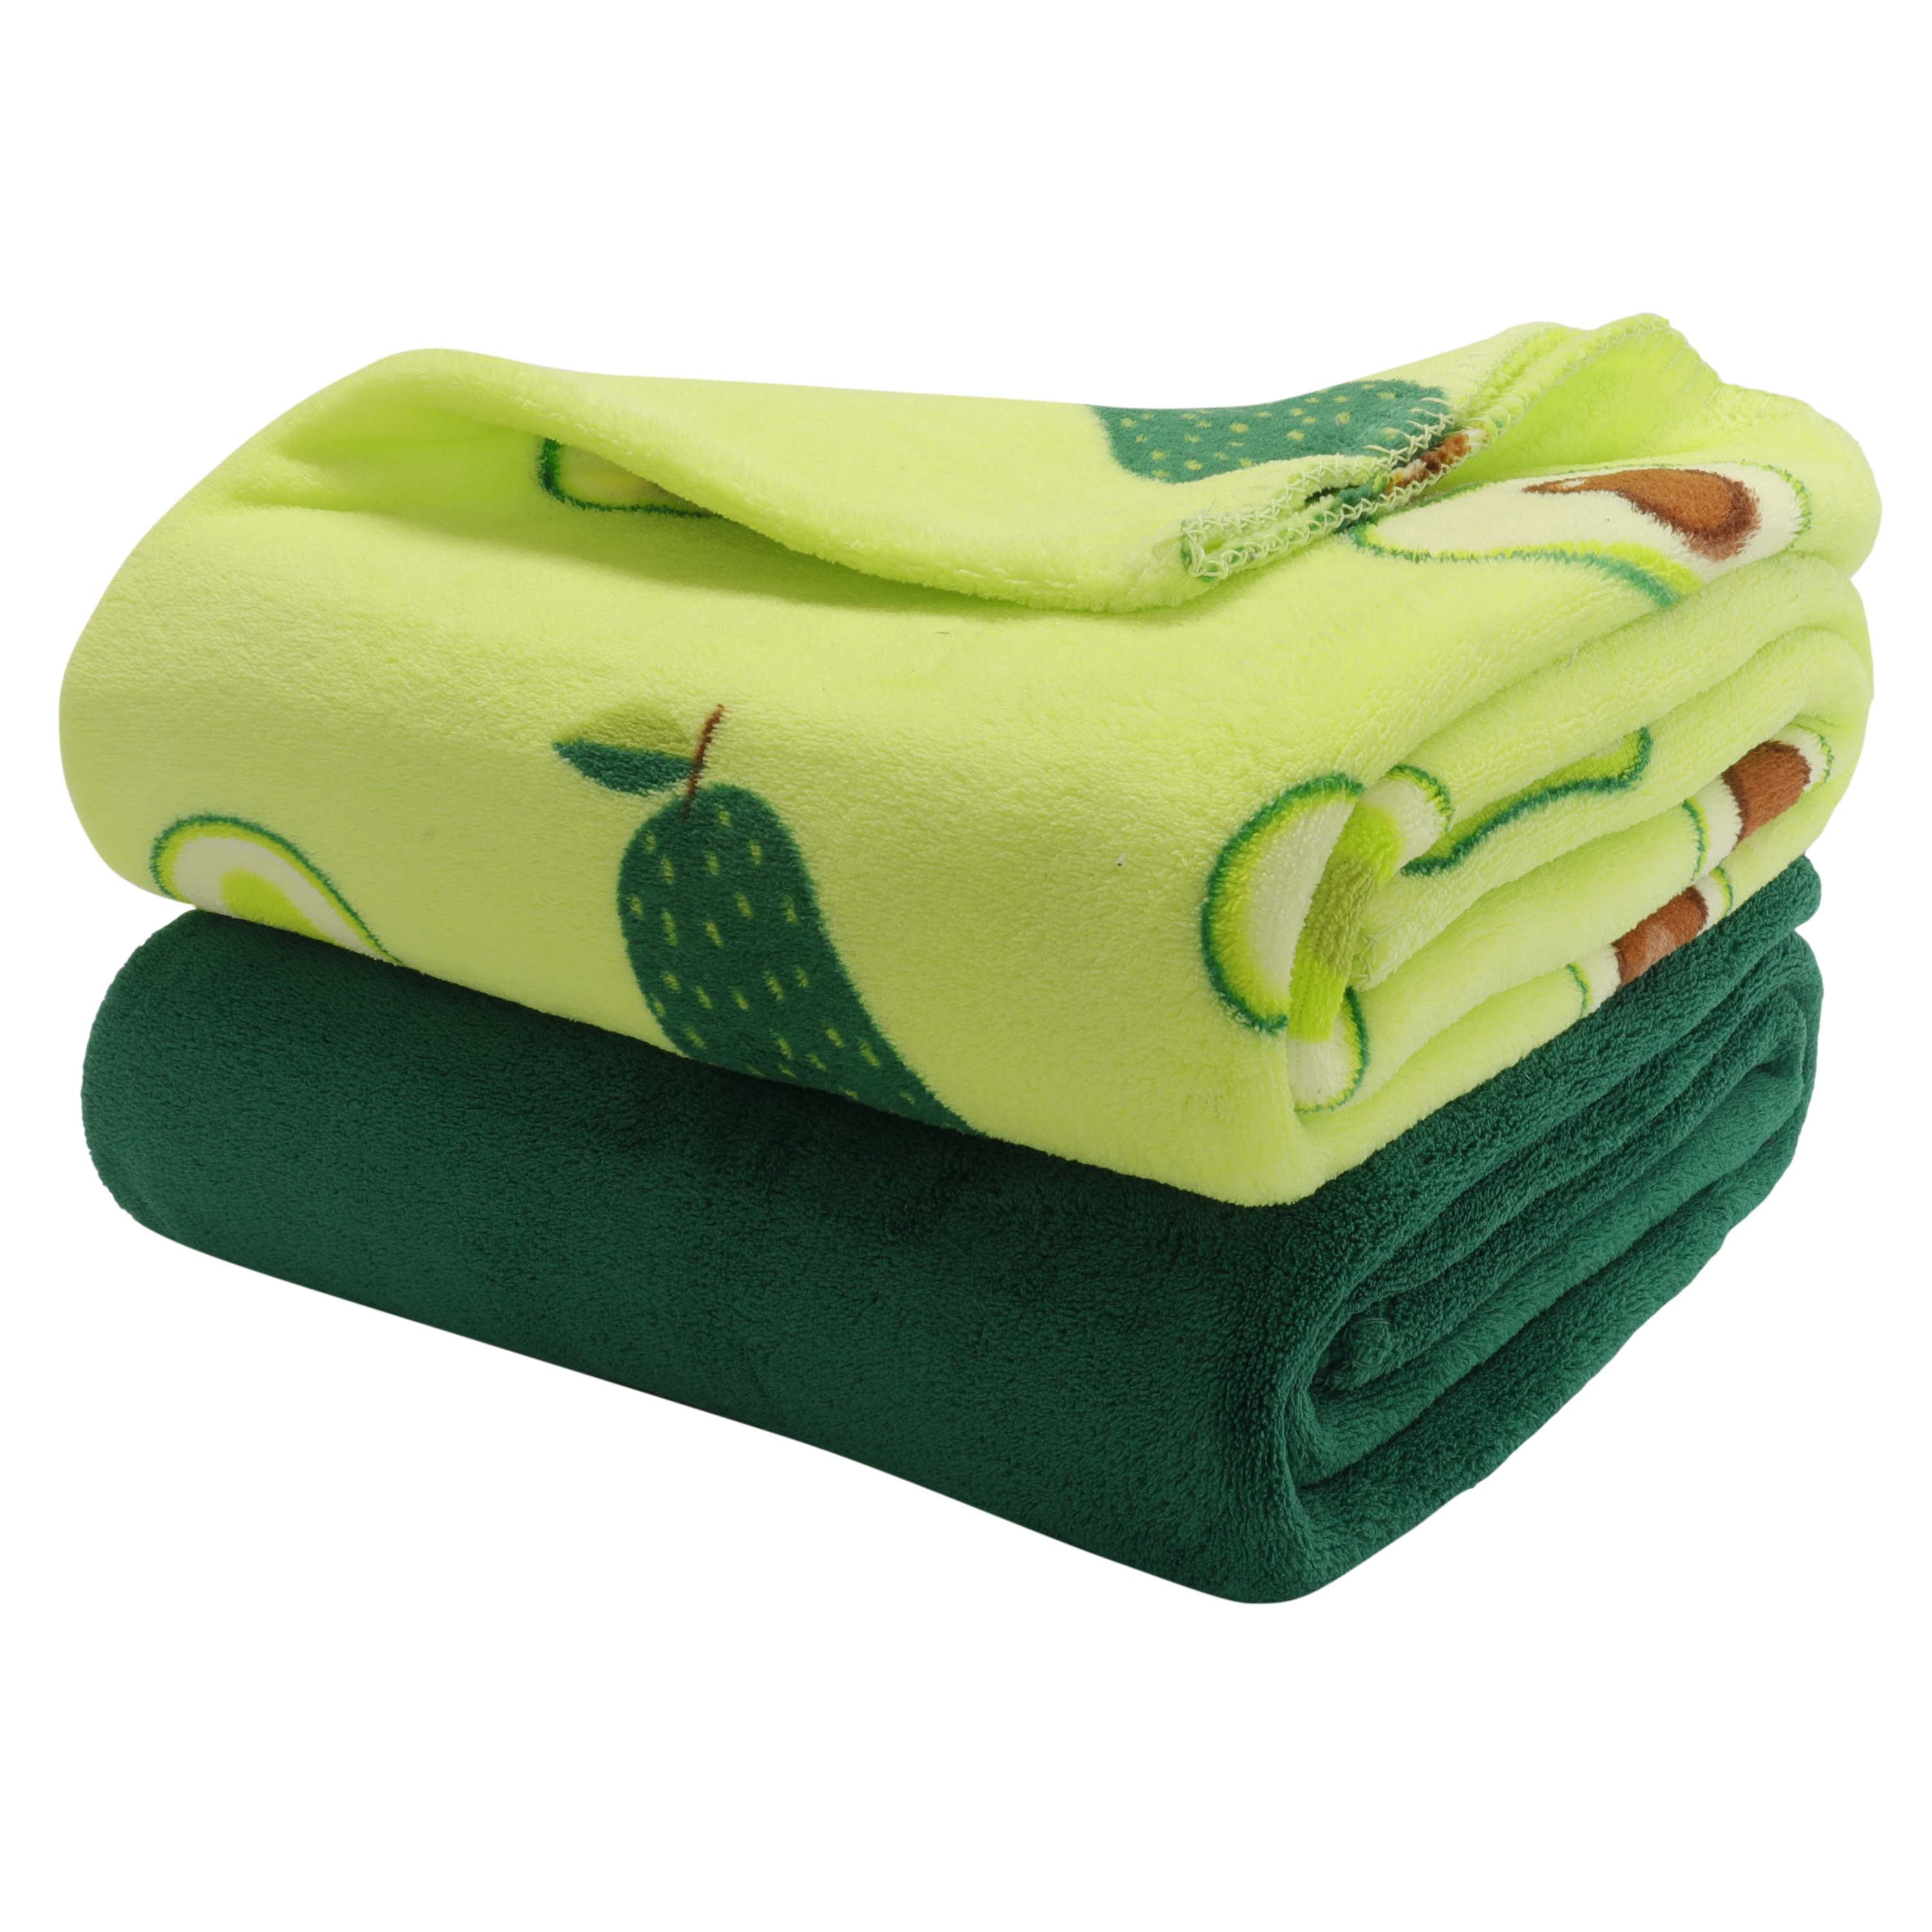 PNNUO Fleece Blankets and Throws-Avocado Yoga PNNUO Fleece Blankets,Soft Warm Throw Blankets for Couch Bed Travel,Blanket Queen Size for Adults & Kids